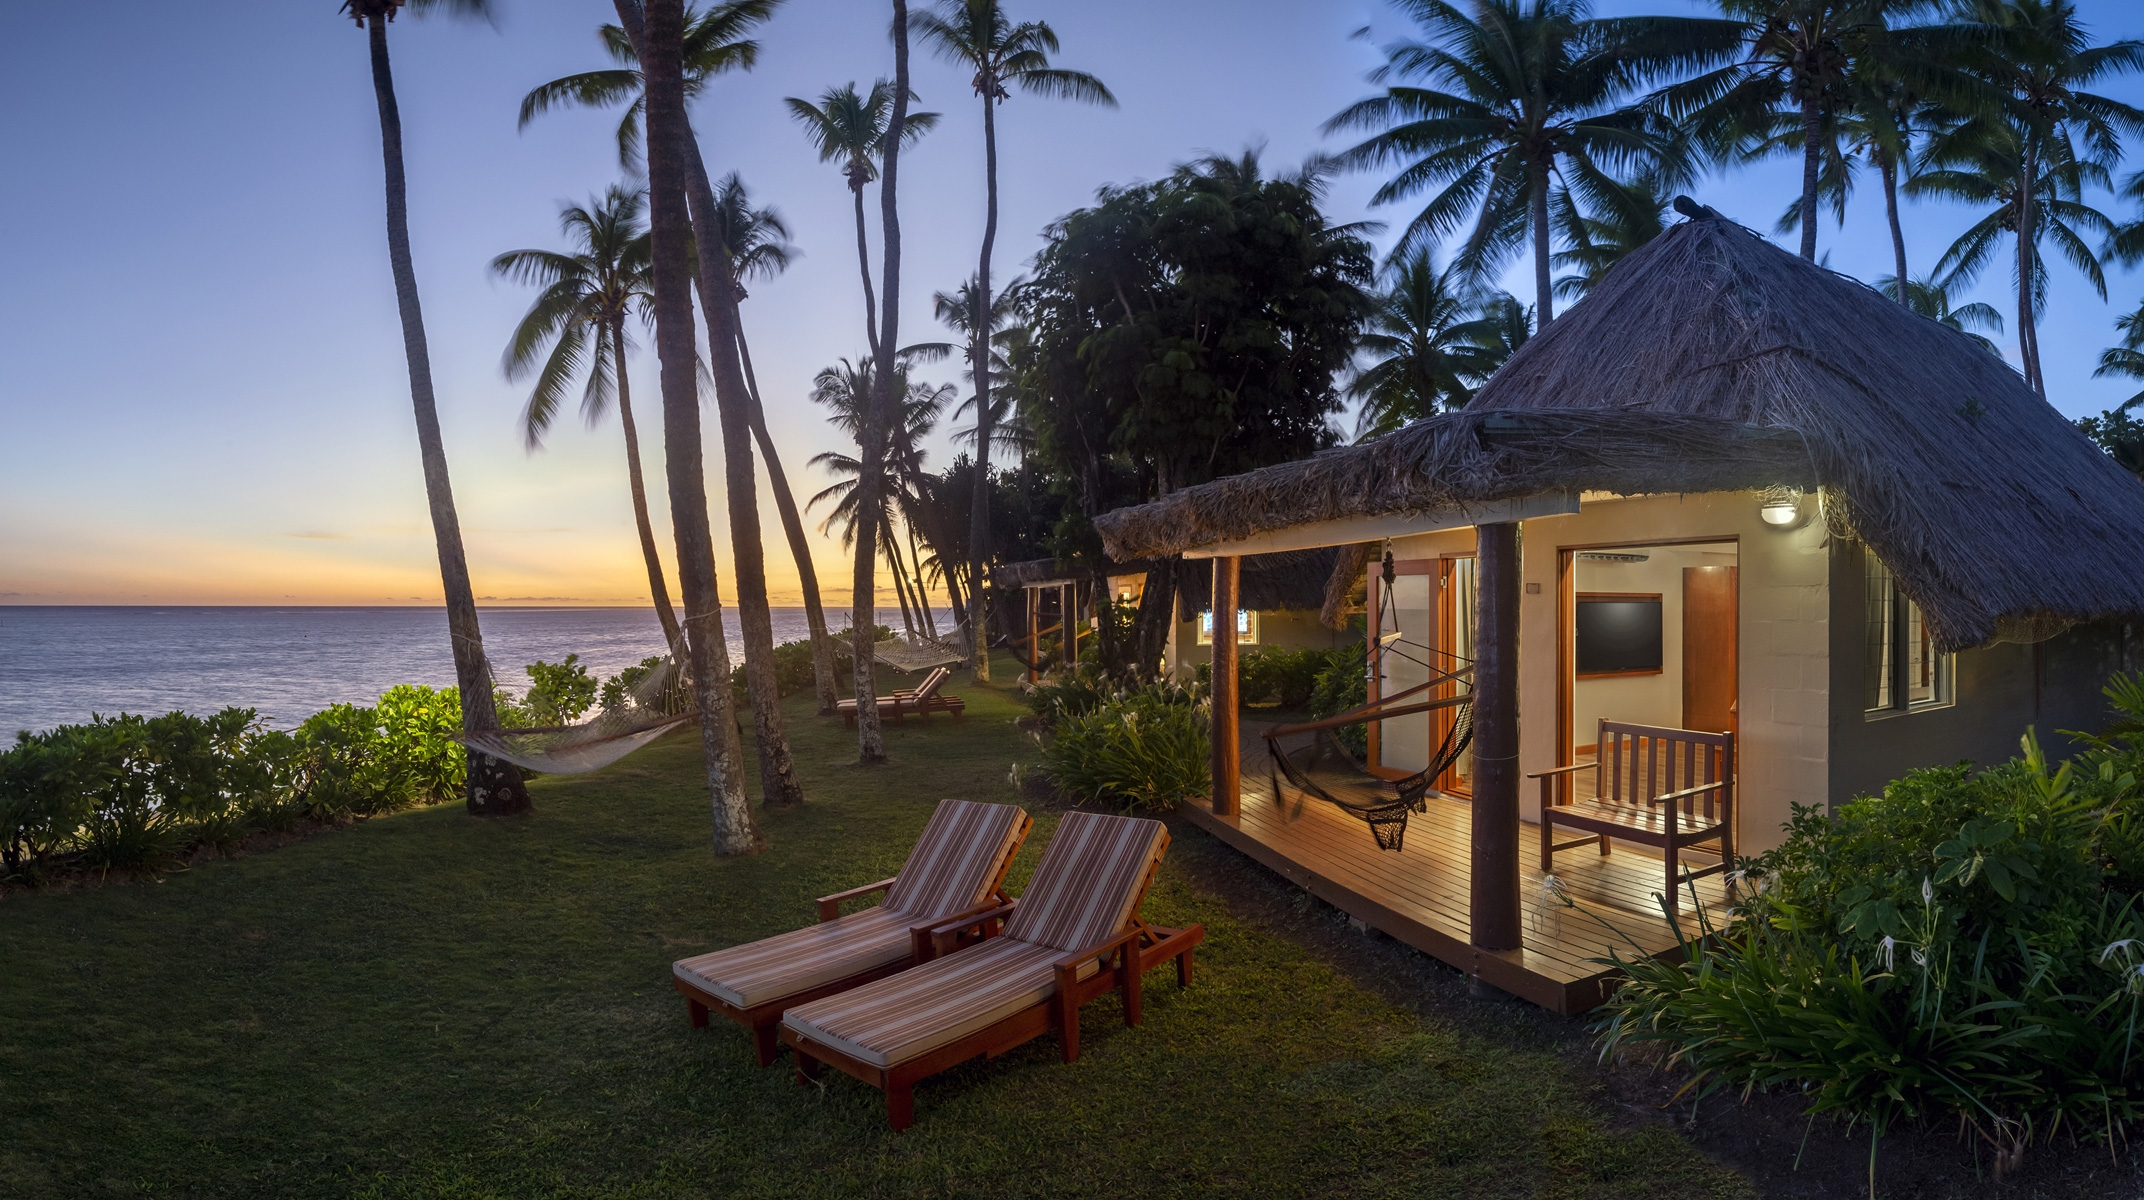 The Beachfront Bures at Outrigger Fiji Beach Resort are nestled amid palm trees, directly on the sandy shore— Photo by S Hotels & Resorts